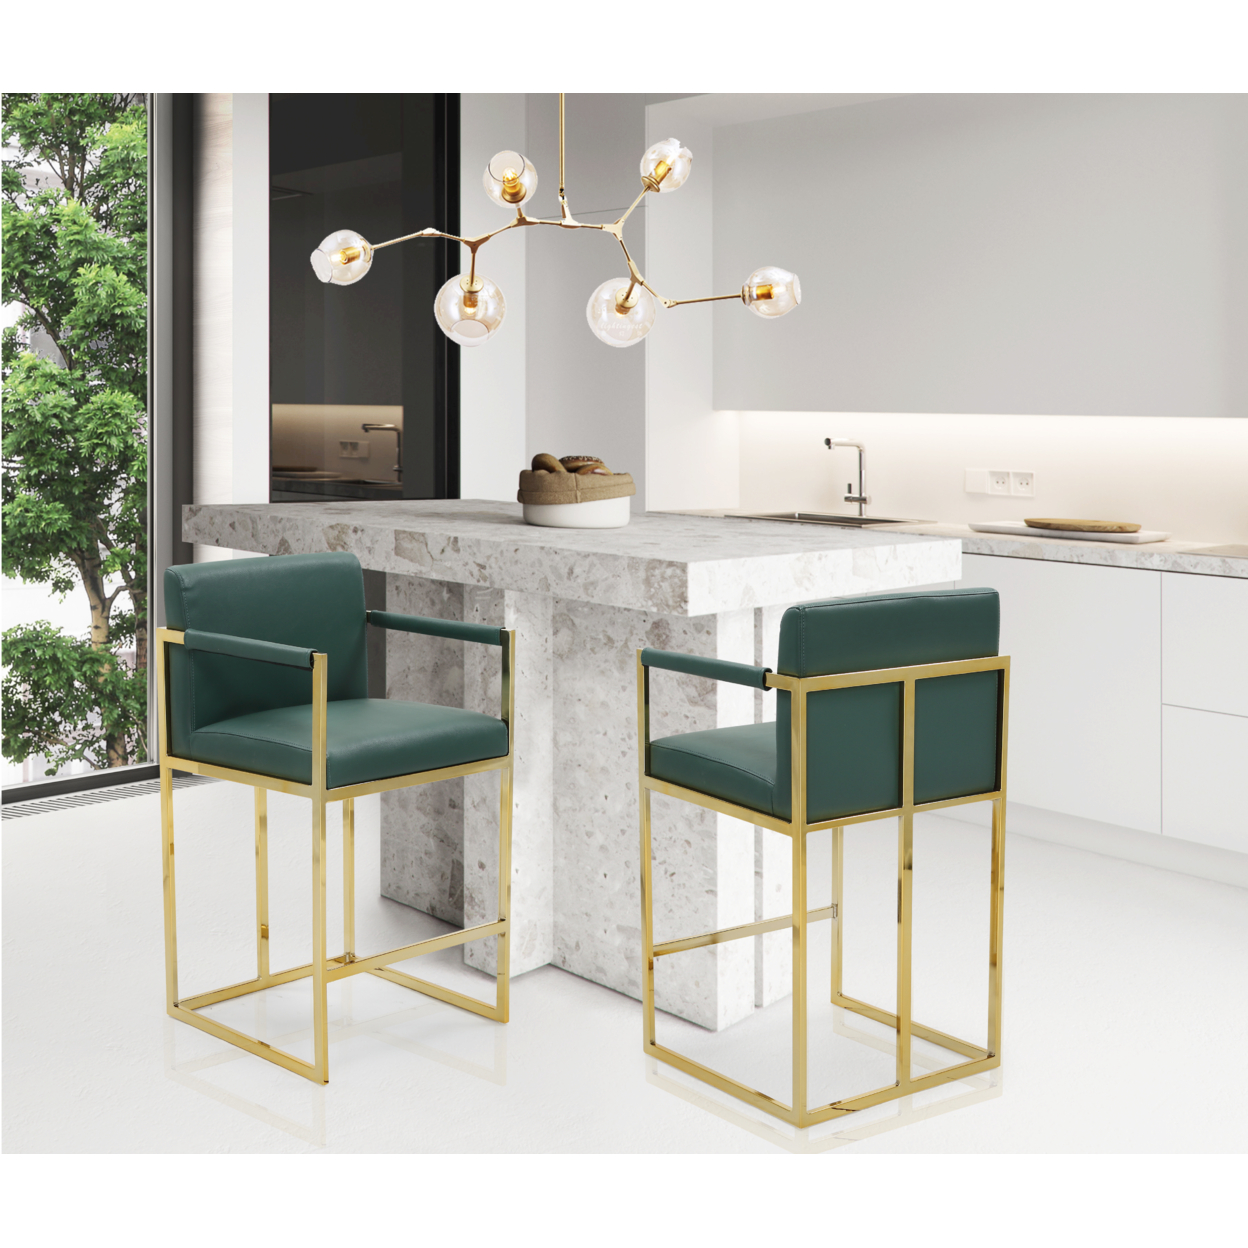 Gertrude Bar Stool Or Counter Stool Chair PU Leather Upholstered Square Arm Design Architectural Goldtone Solid Metal Base - Green, Height: